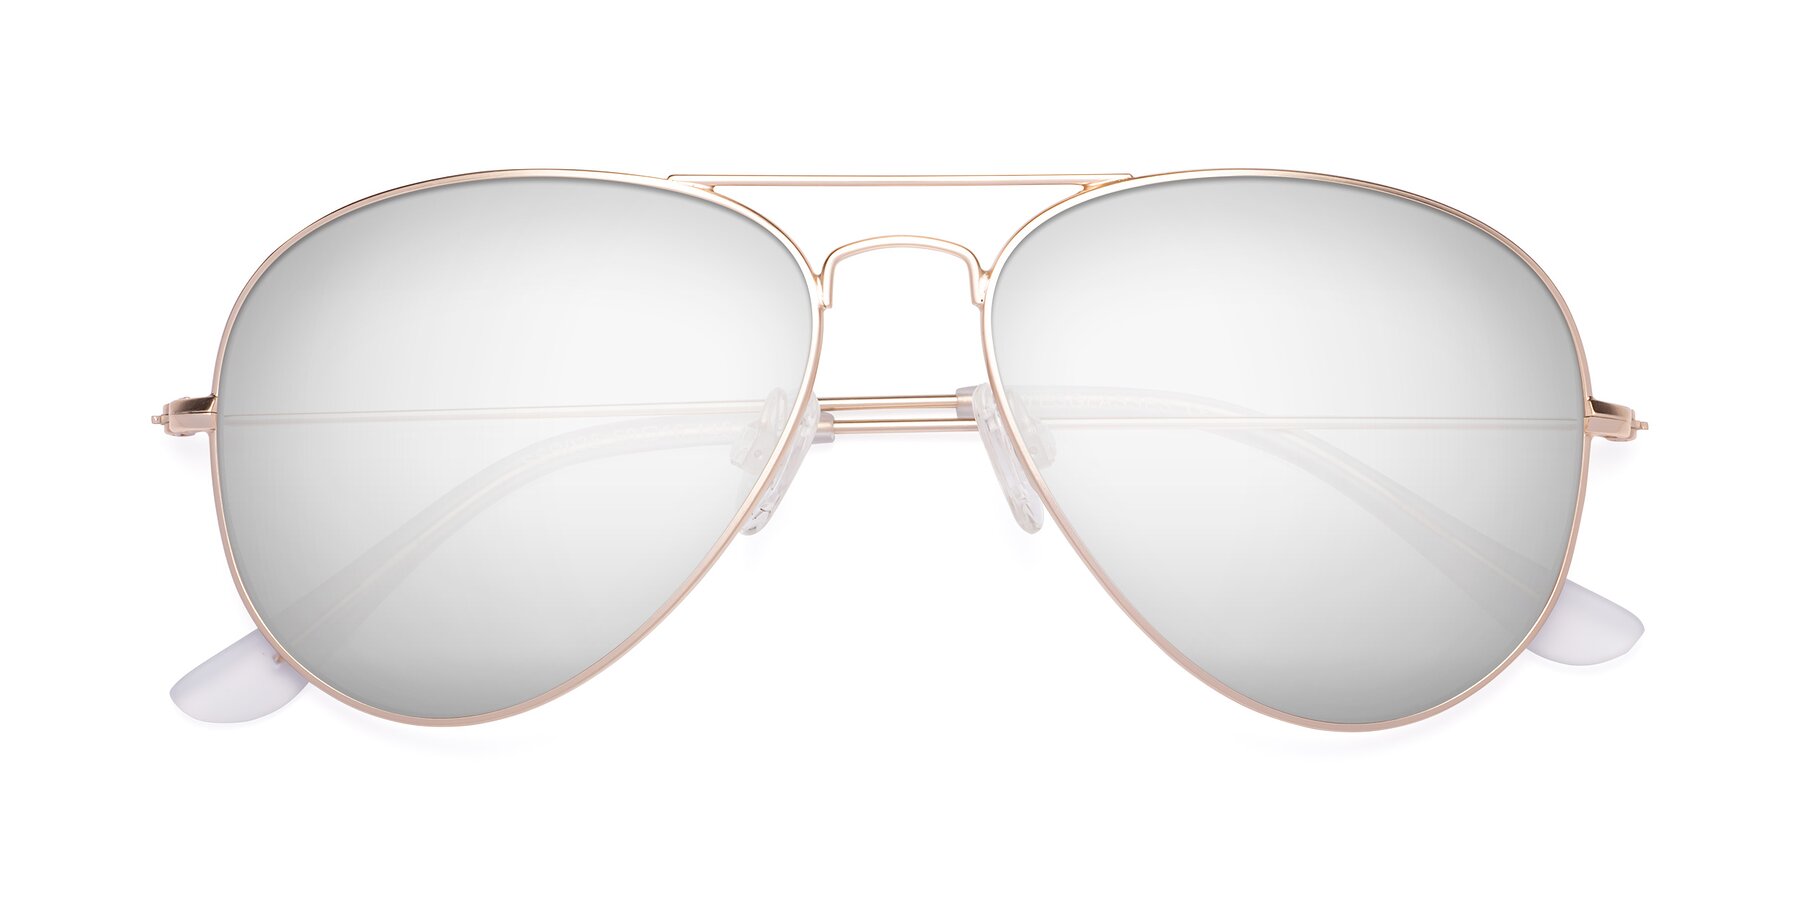 Jet Gold Thin Aviator Mirrored Sunglasses with Silver Sunwear Lenses - Yesterday